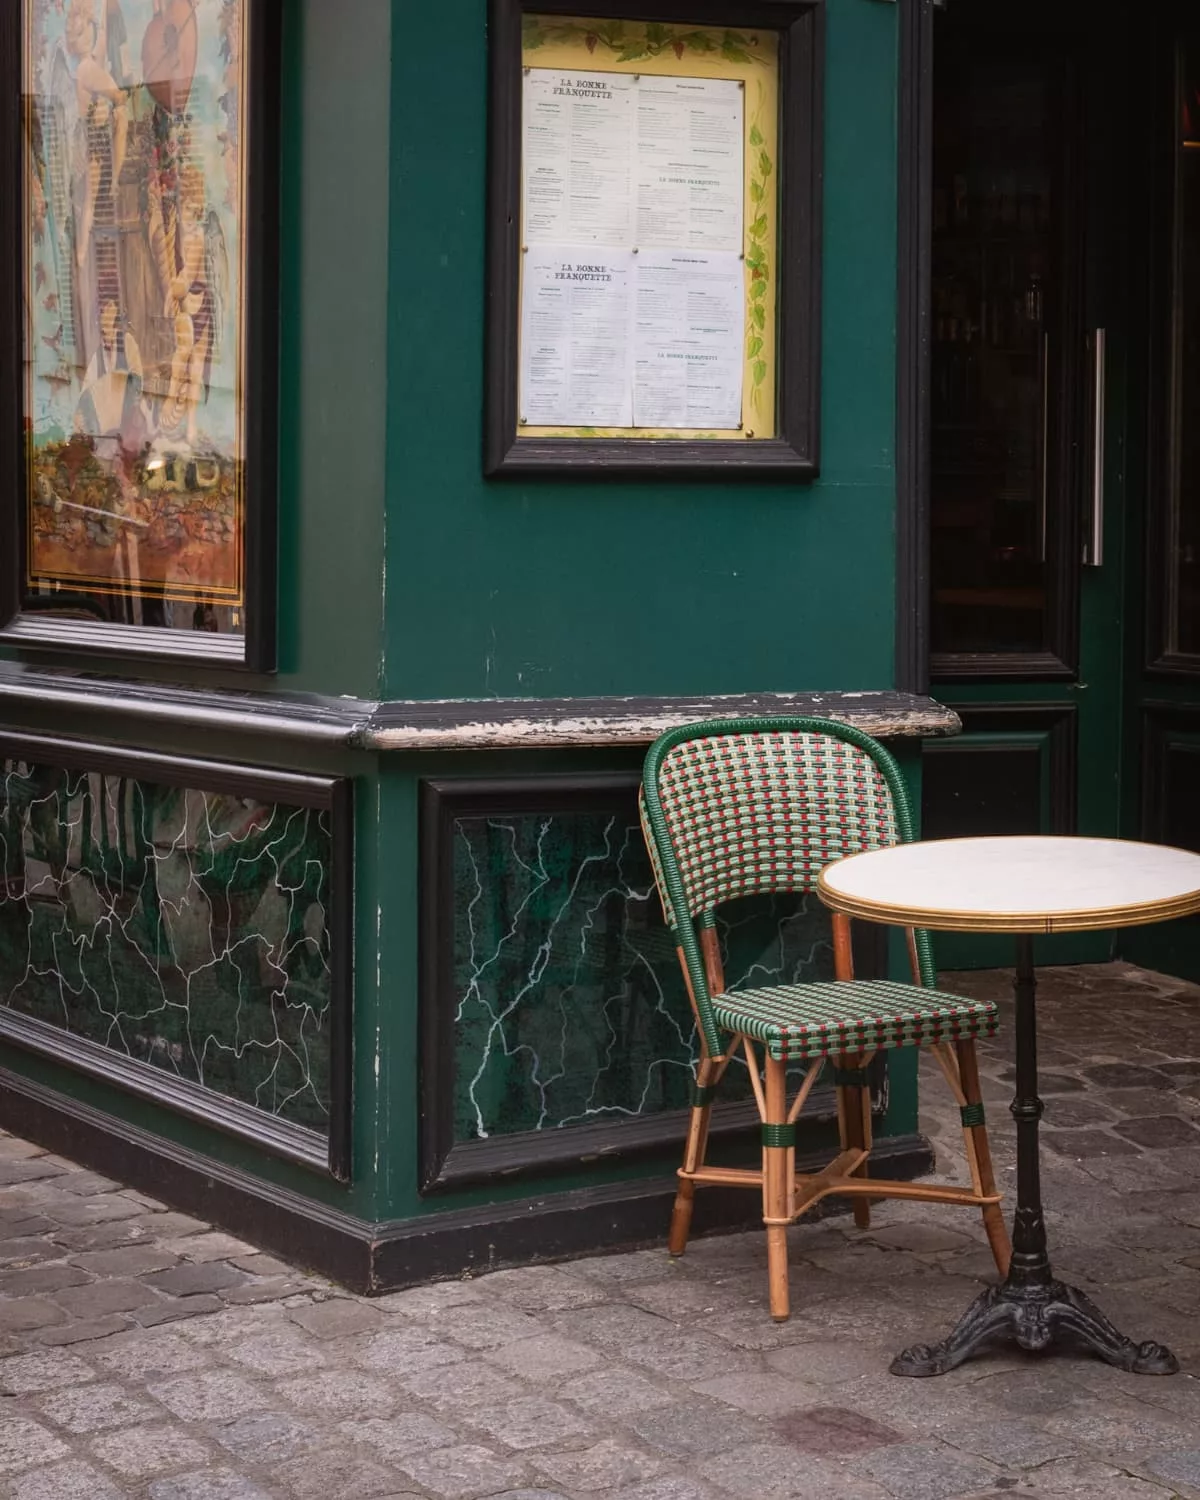 Green table and chair at a Paris restaurant